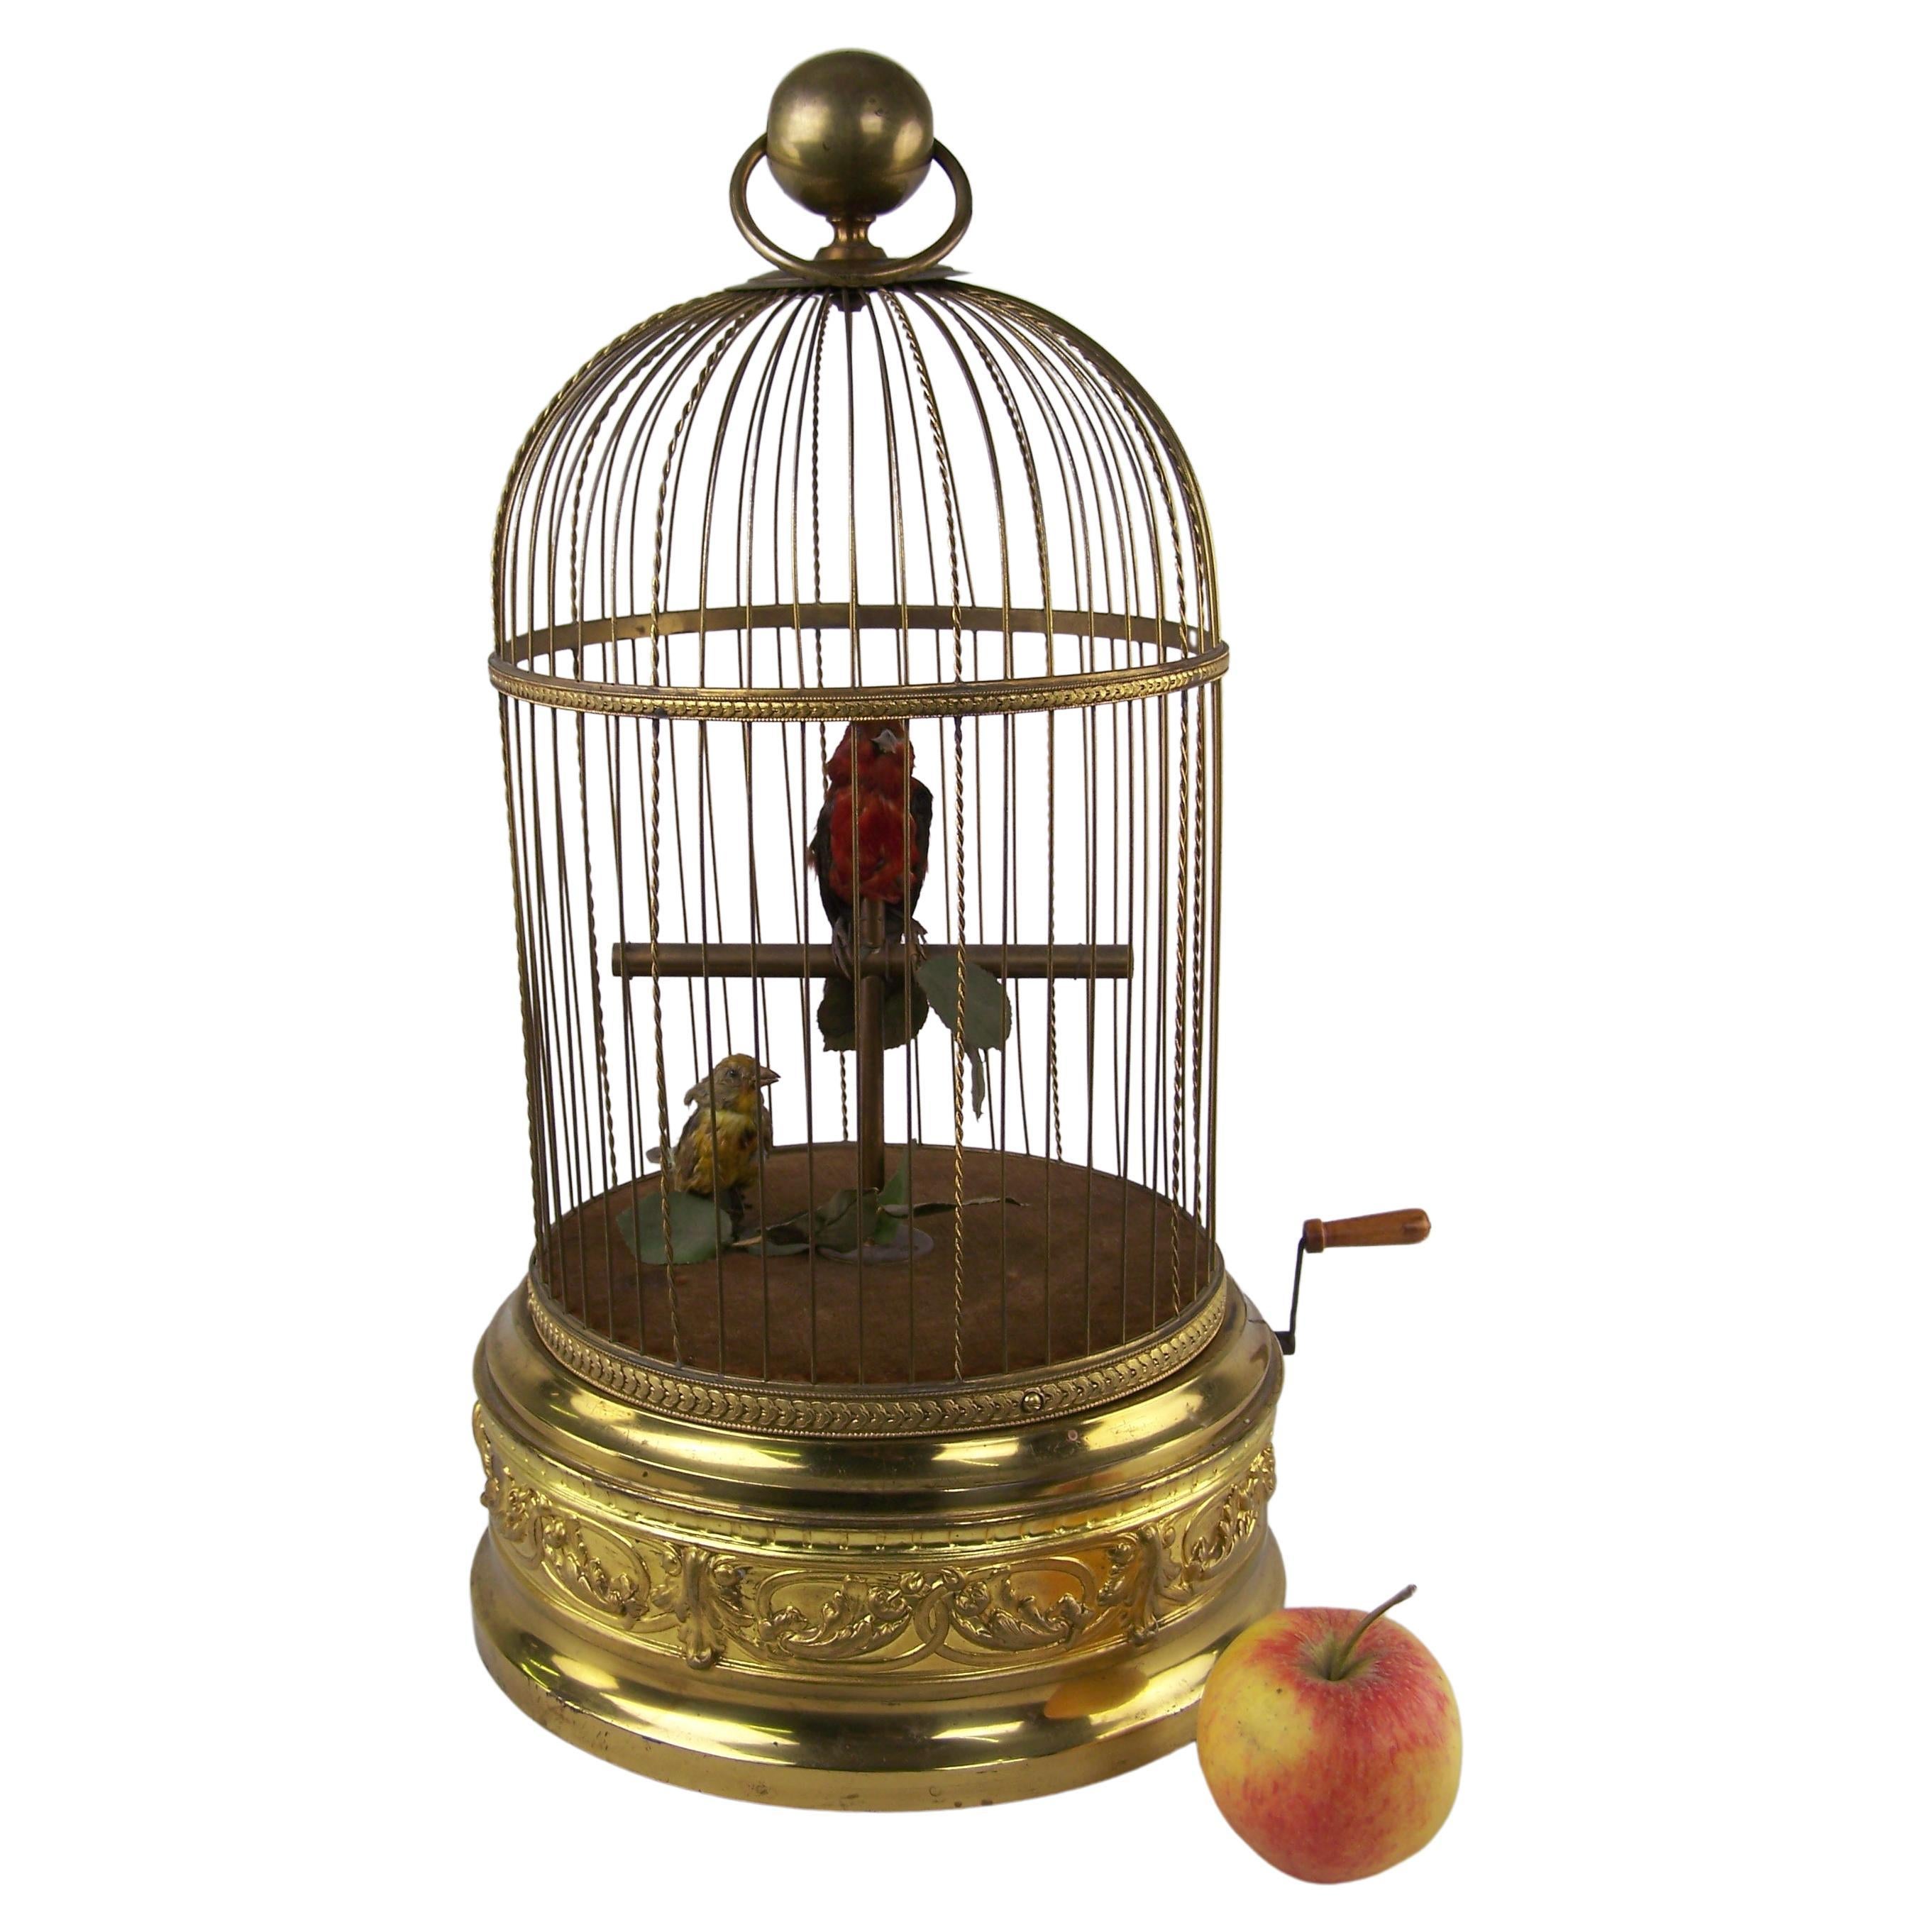 Singing Bird Cage with 2 birds by Bontems 